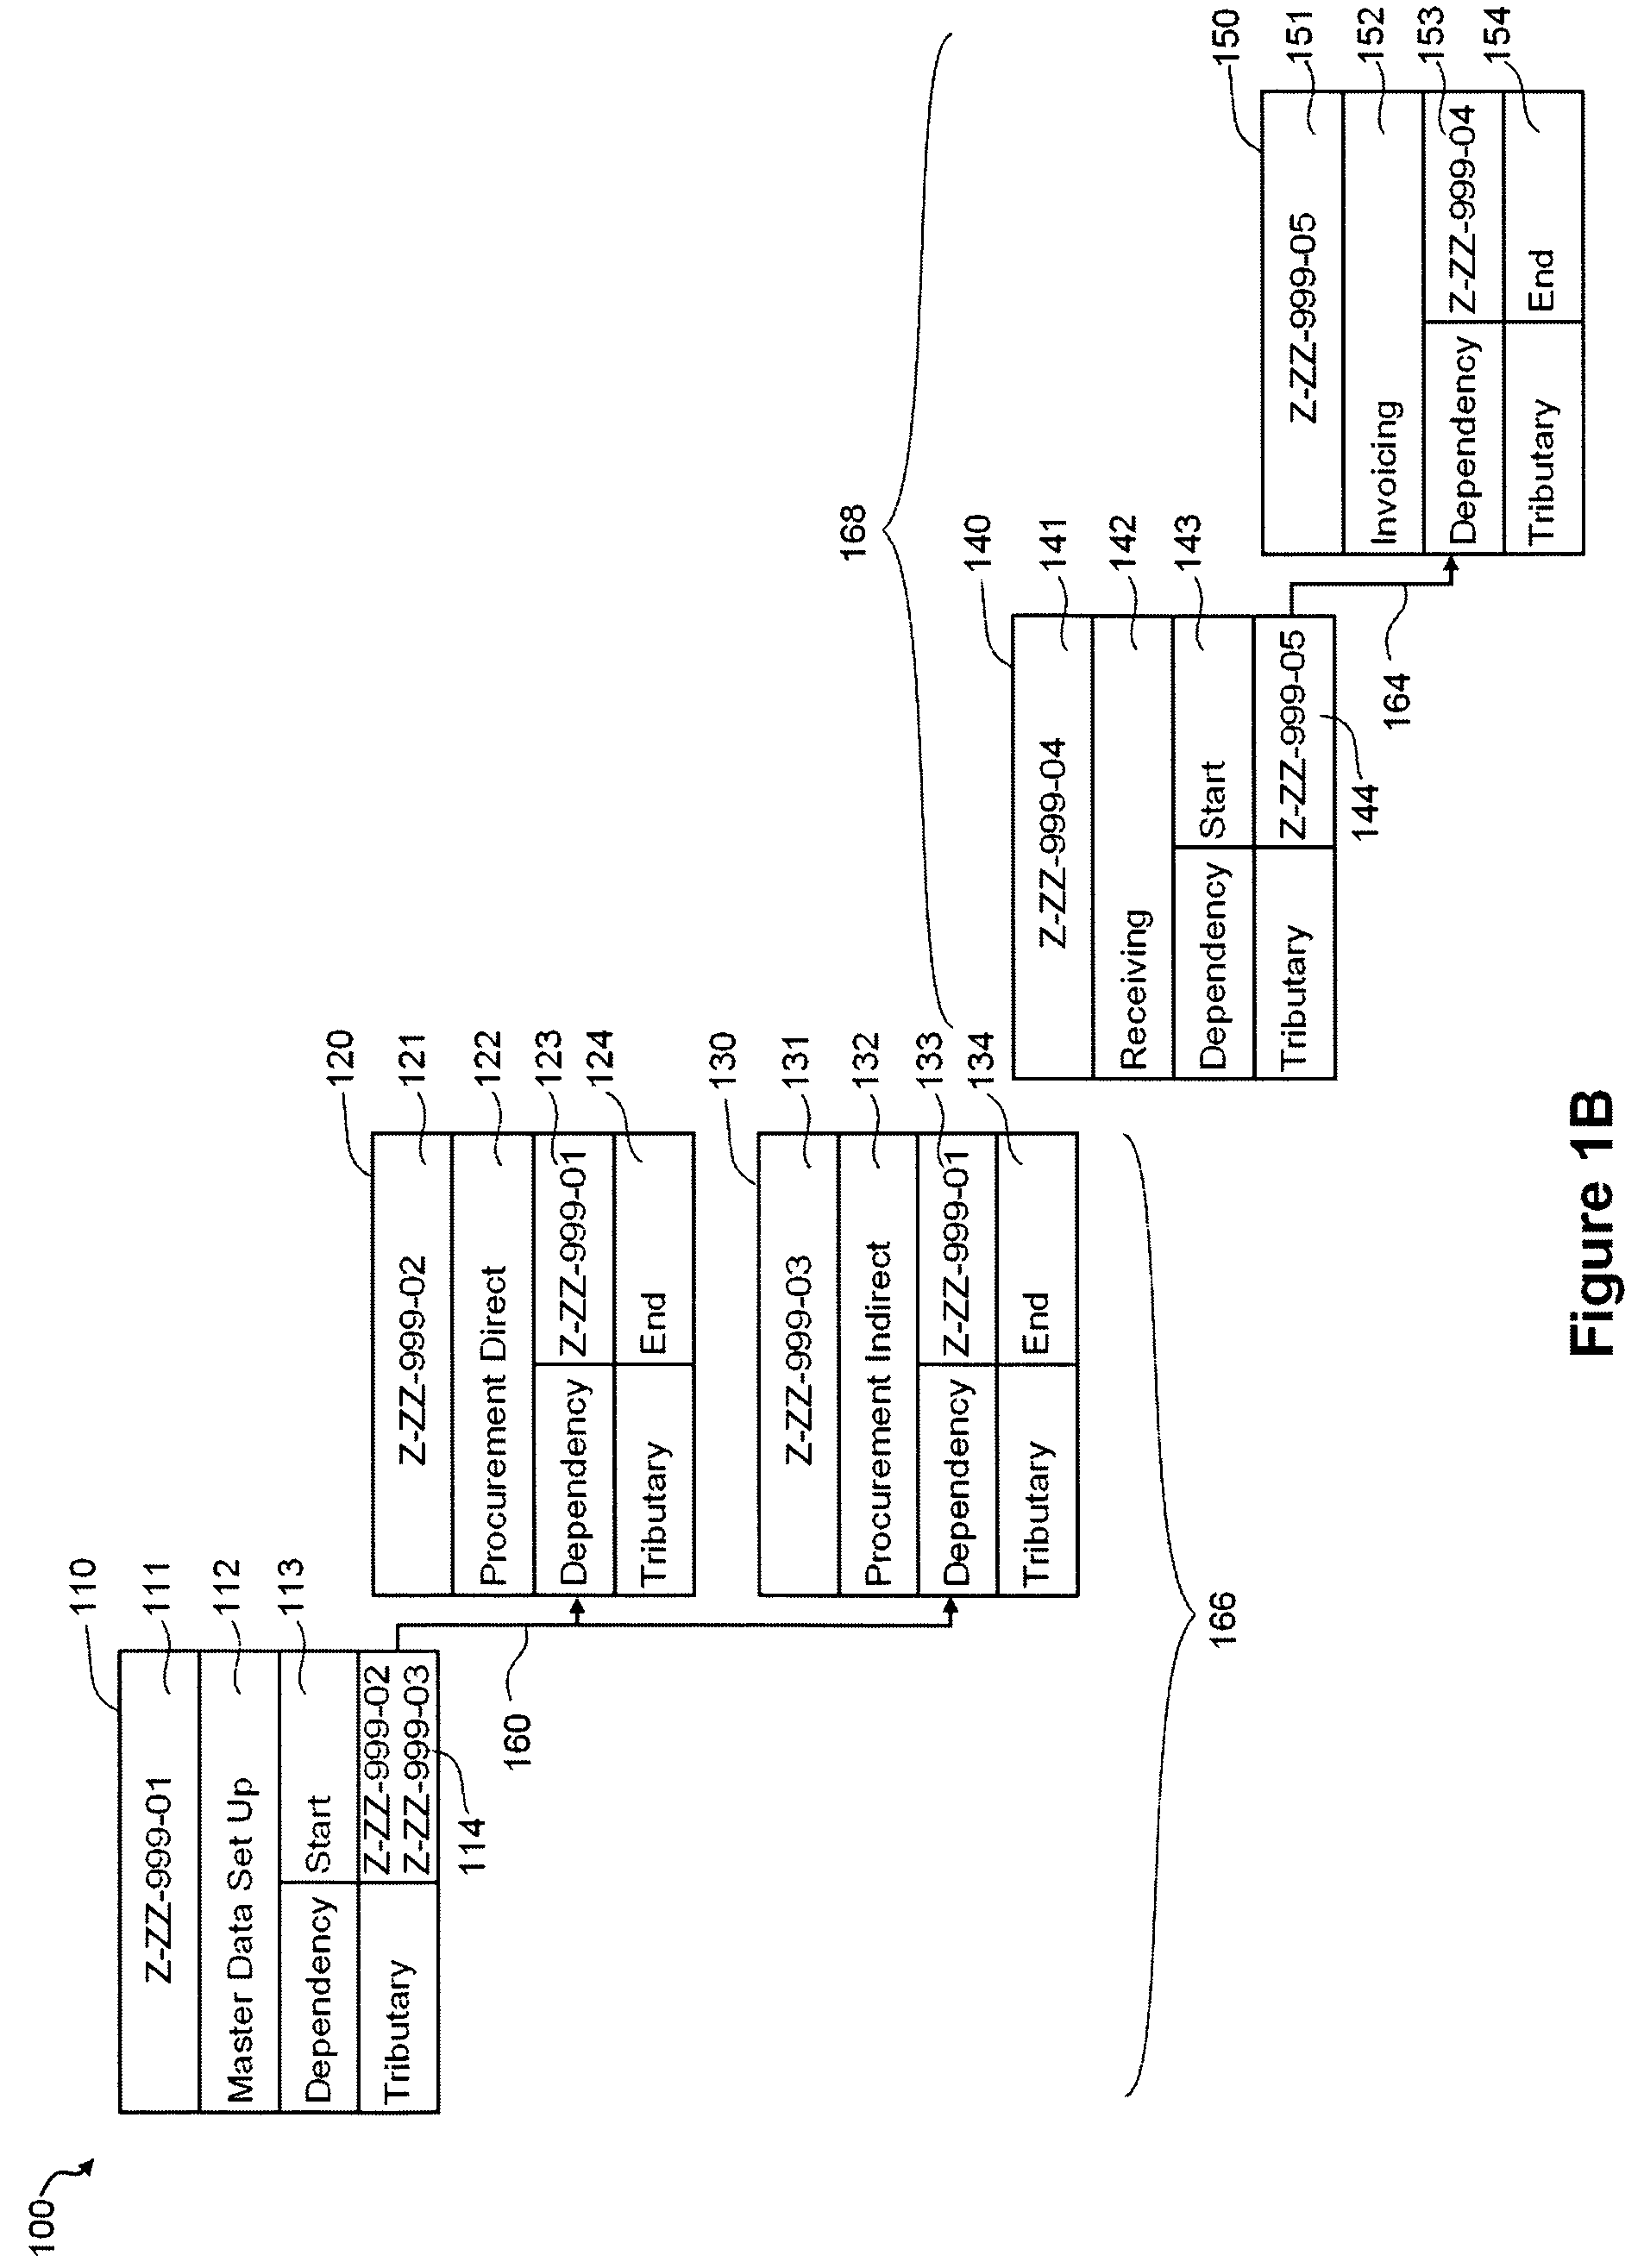 Testing tool comprising an automated multidimensional traceability matrix for implementing and validating complex software systems